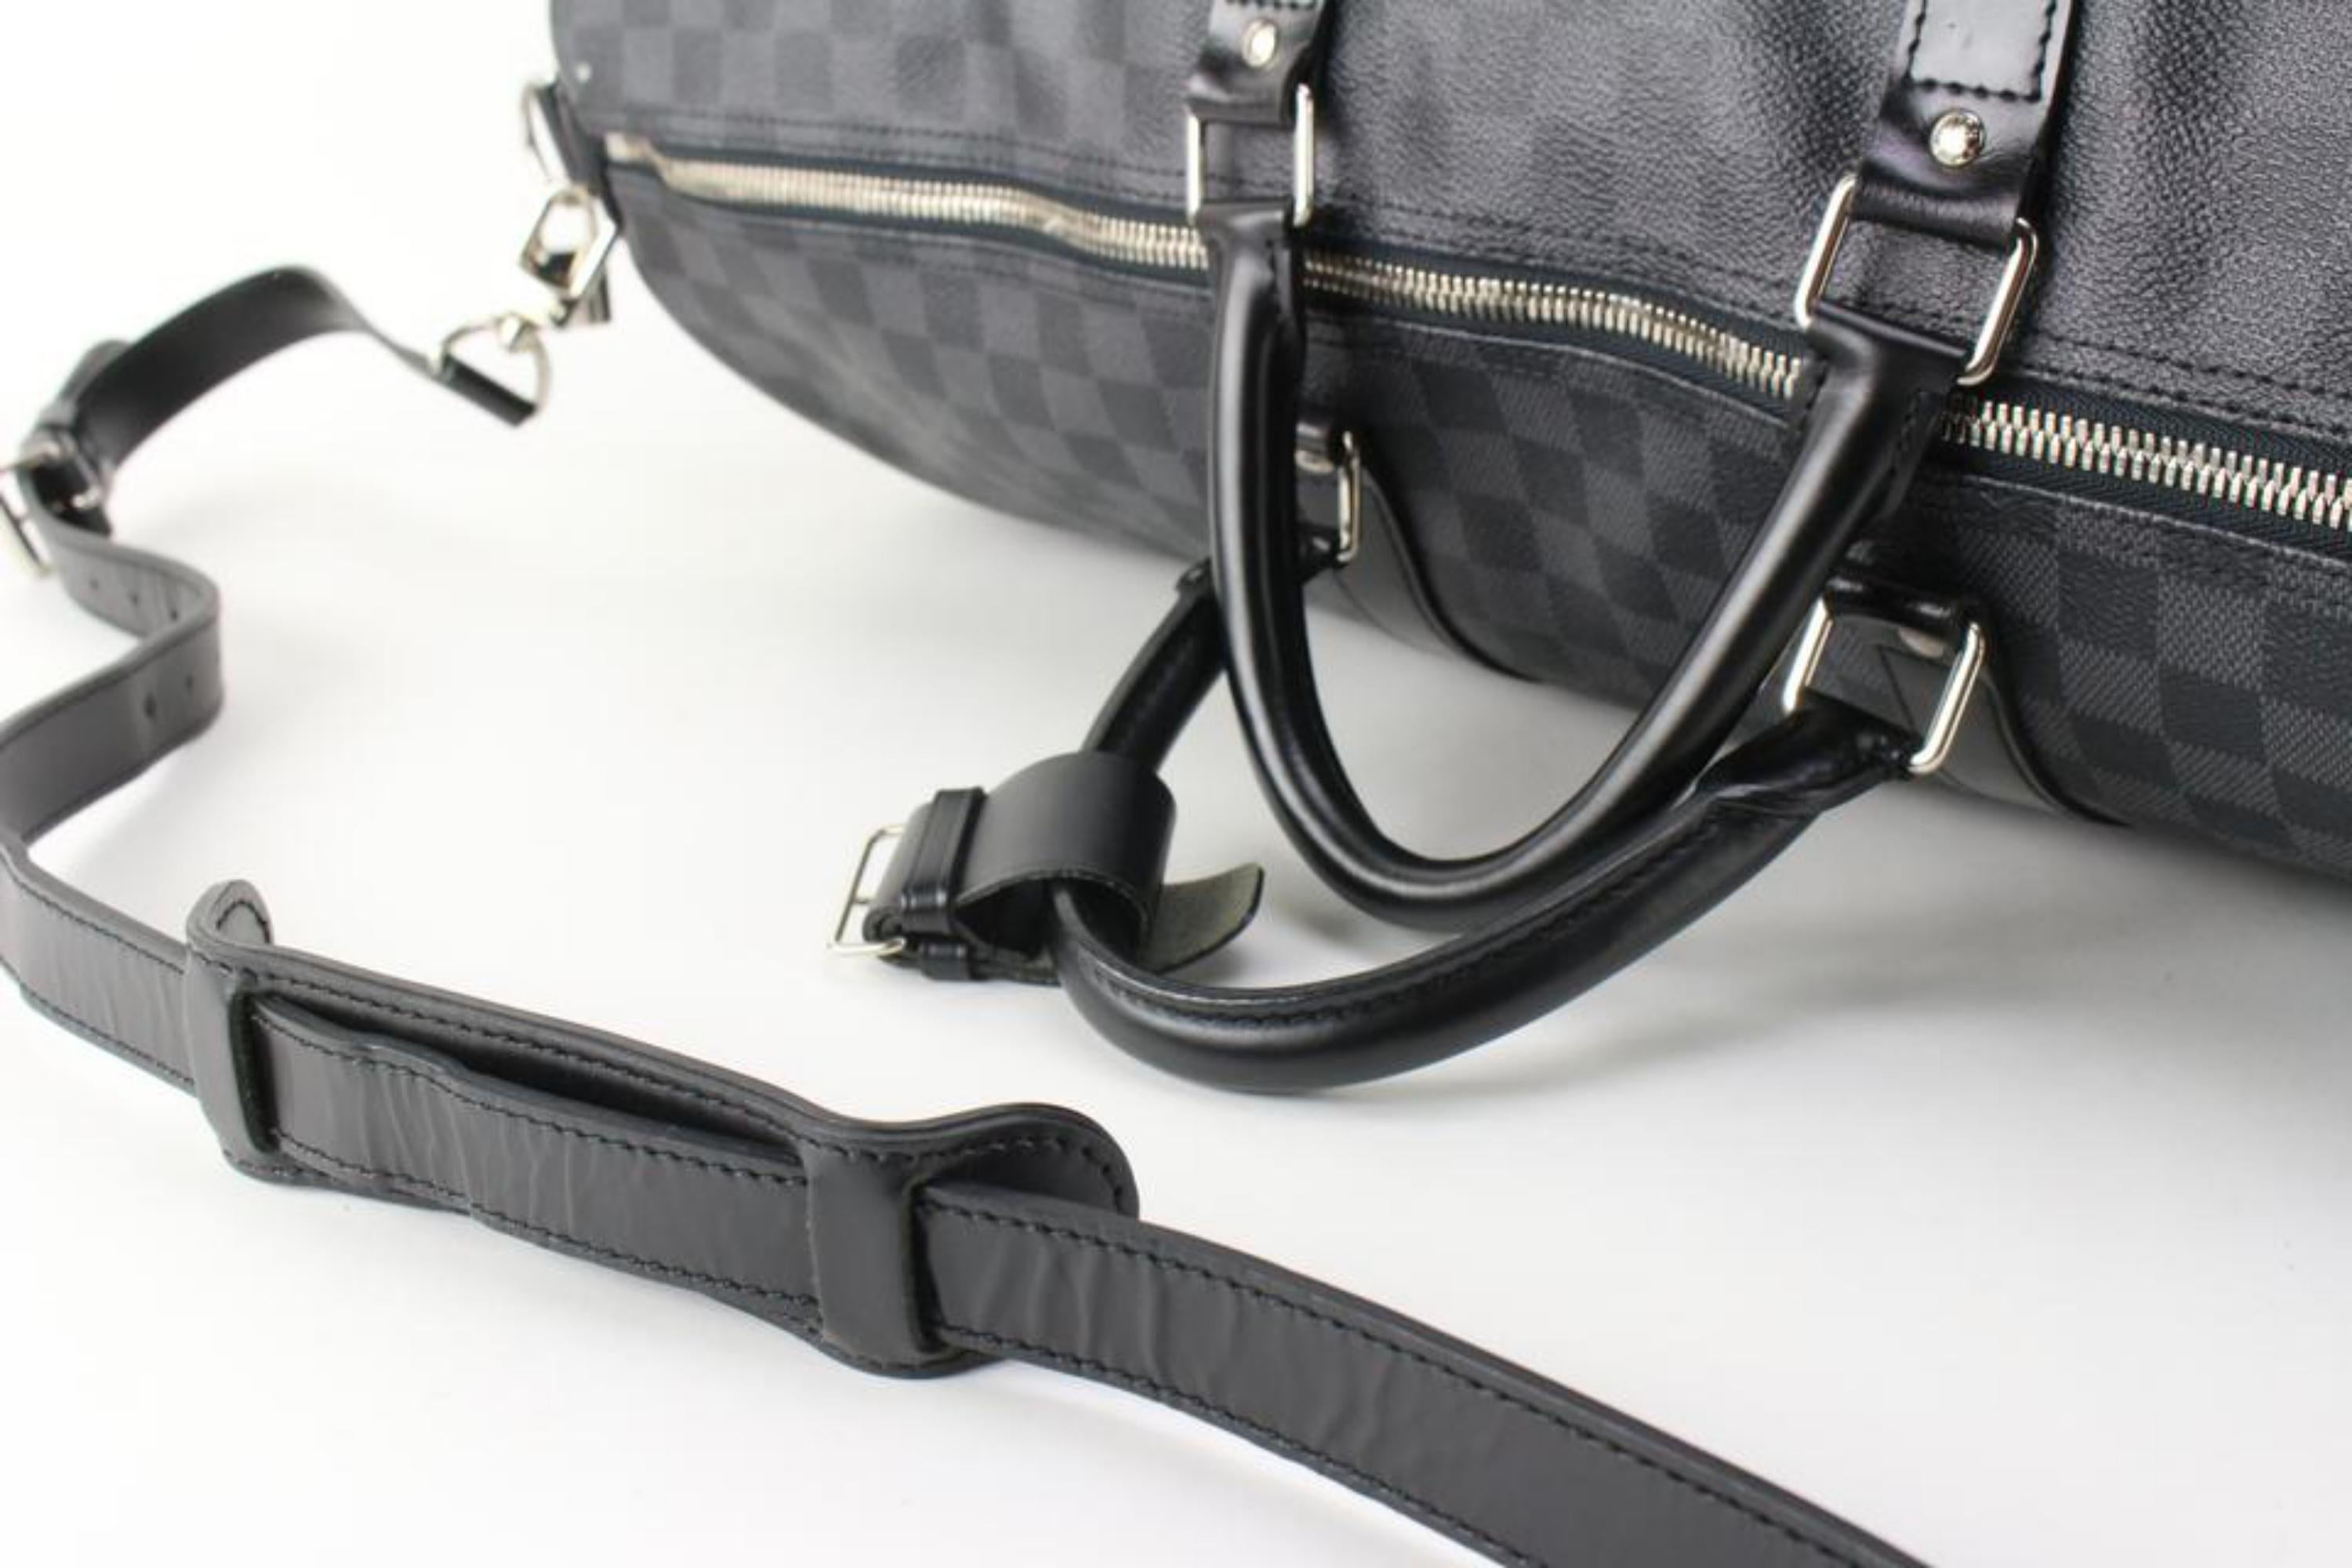 Louis Vuitton Damier Graphite Keepall Bandouliere 55 Duffle with Strap 9lk822s In Good Condition For Sale In Dix hills, NY